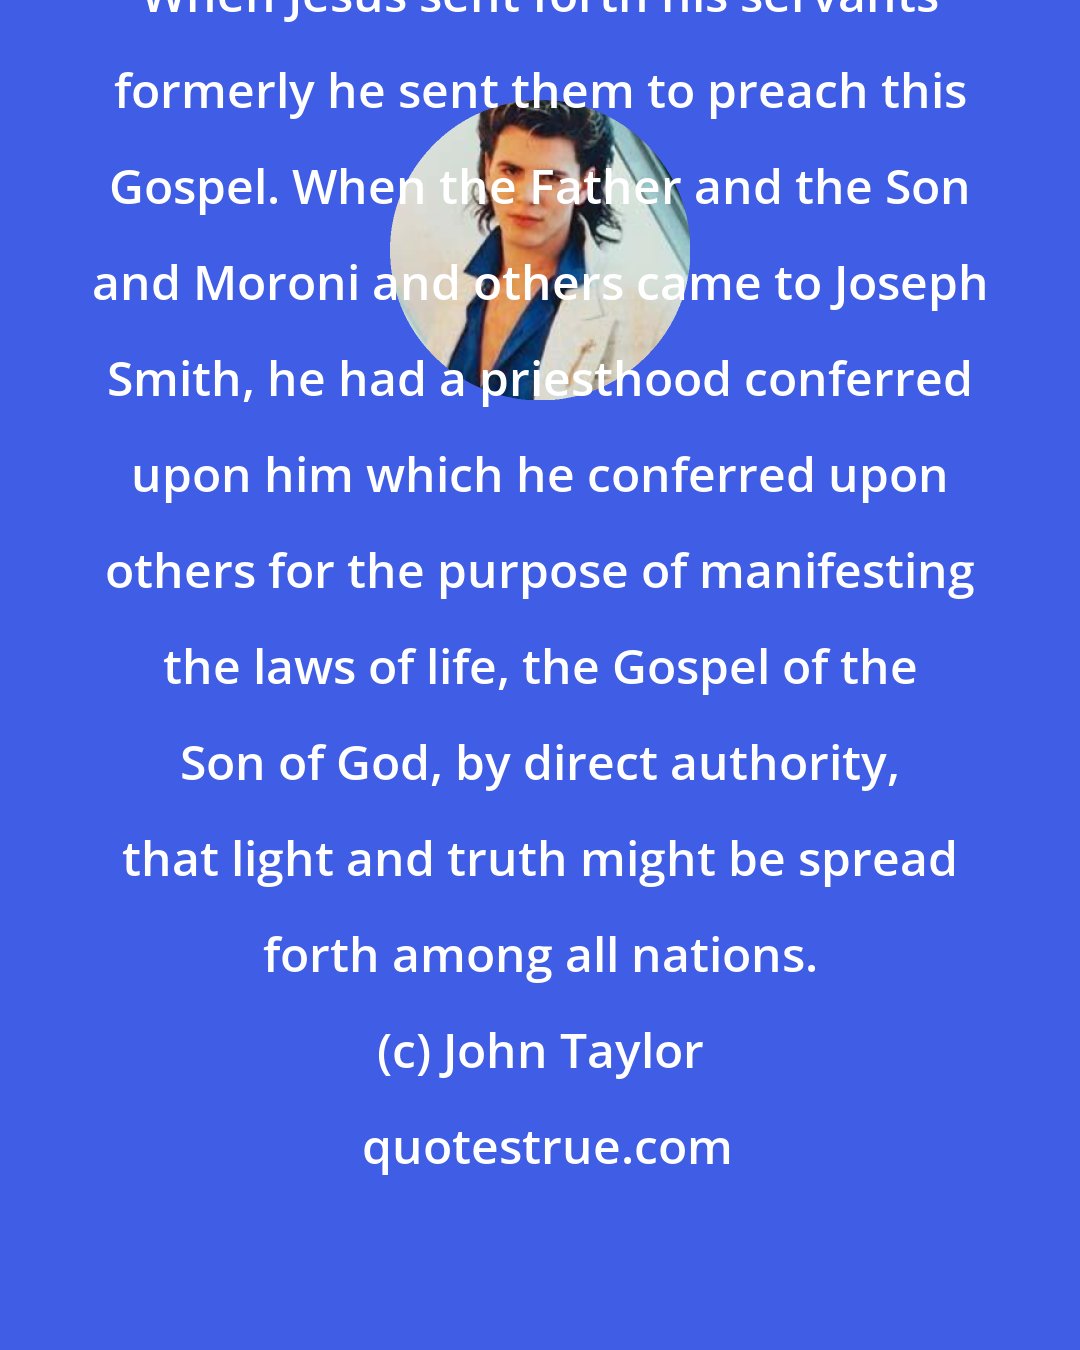 John Taylor: When Jesus sent forth his servants formerly he sent them to preach this Gospel. When the Father and the Son and Moroni and others came to Joseph Smith, he had a priesthood conferred upon him which he conferred upon others for the purpose of manifesting the laws of life, the Gospel of the Son of God, by direct authority, that light and truth might be spread forth among all nations.